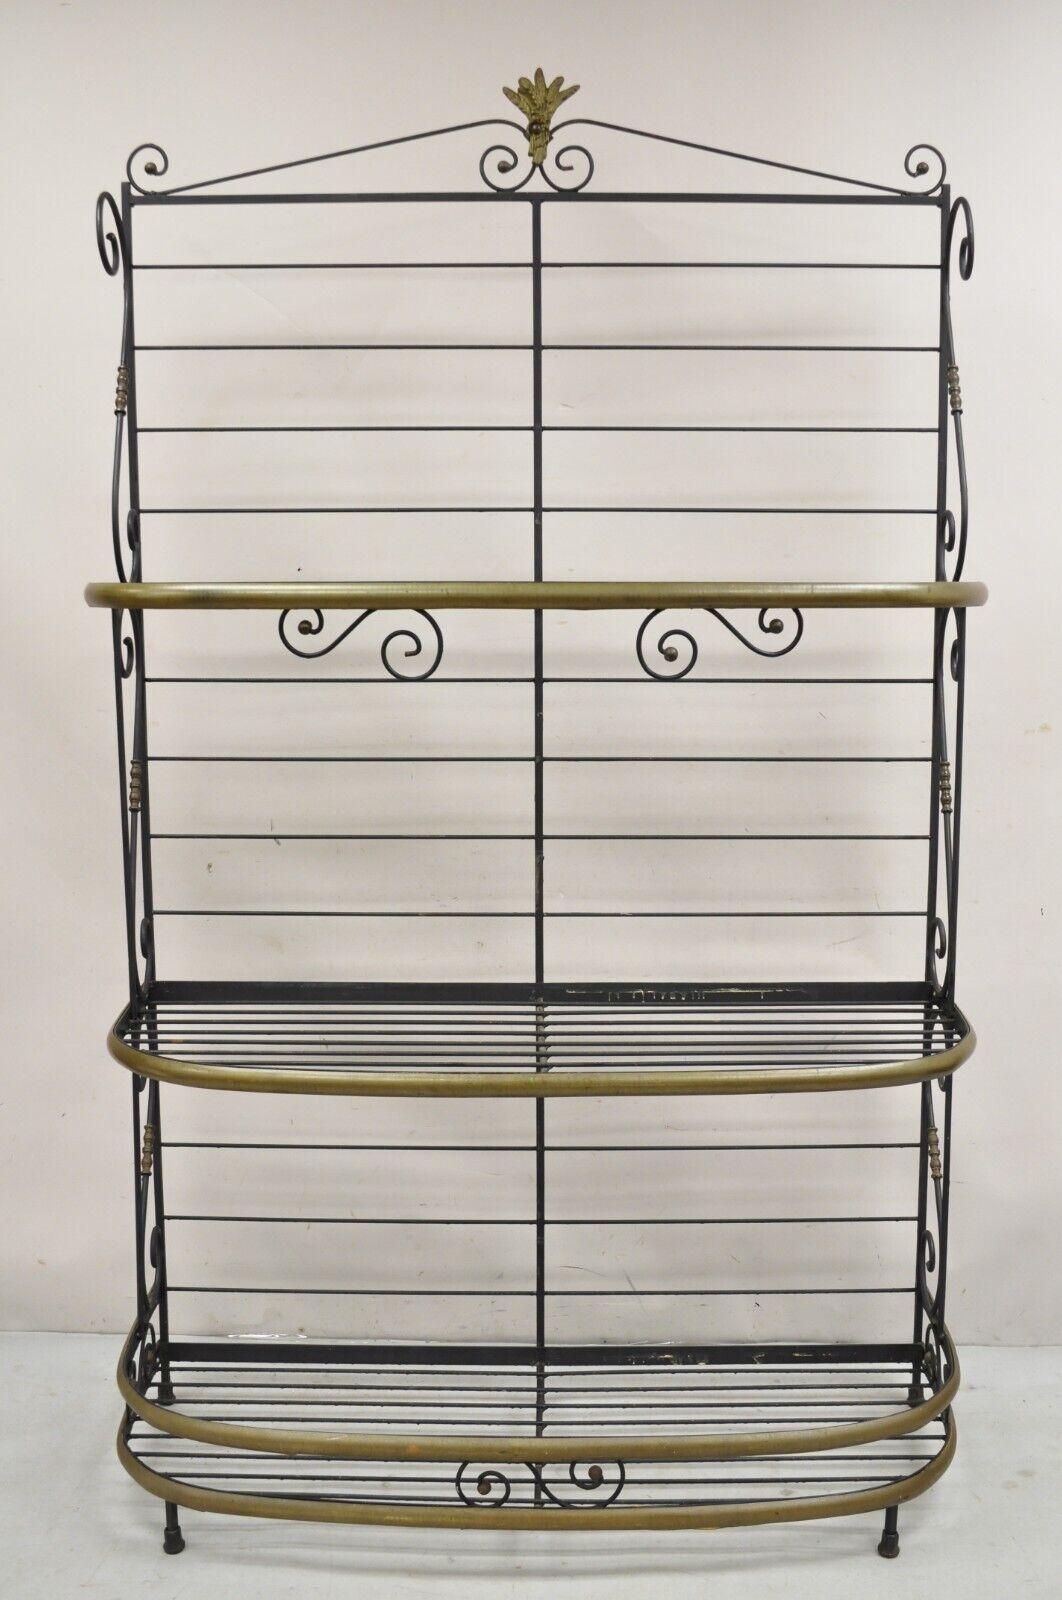 Vintage French Bakers Rack 3 Tier Scrolling Wrought Iron and Brass Etagere. Circa Early to Mid 20th Century. Measurements: 81.5